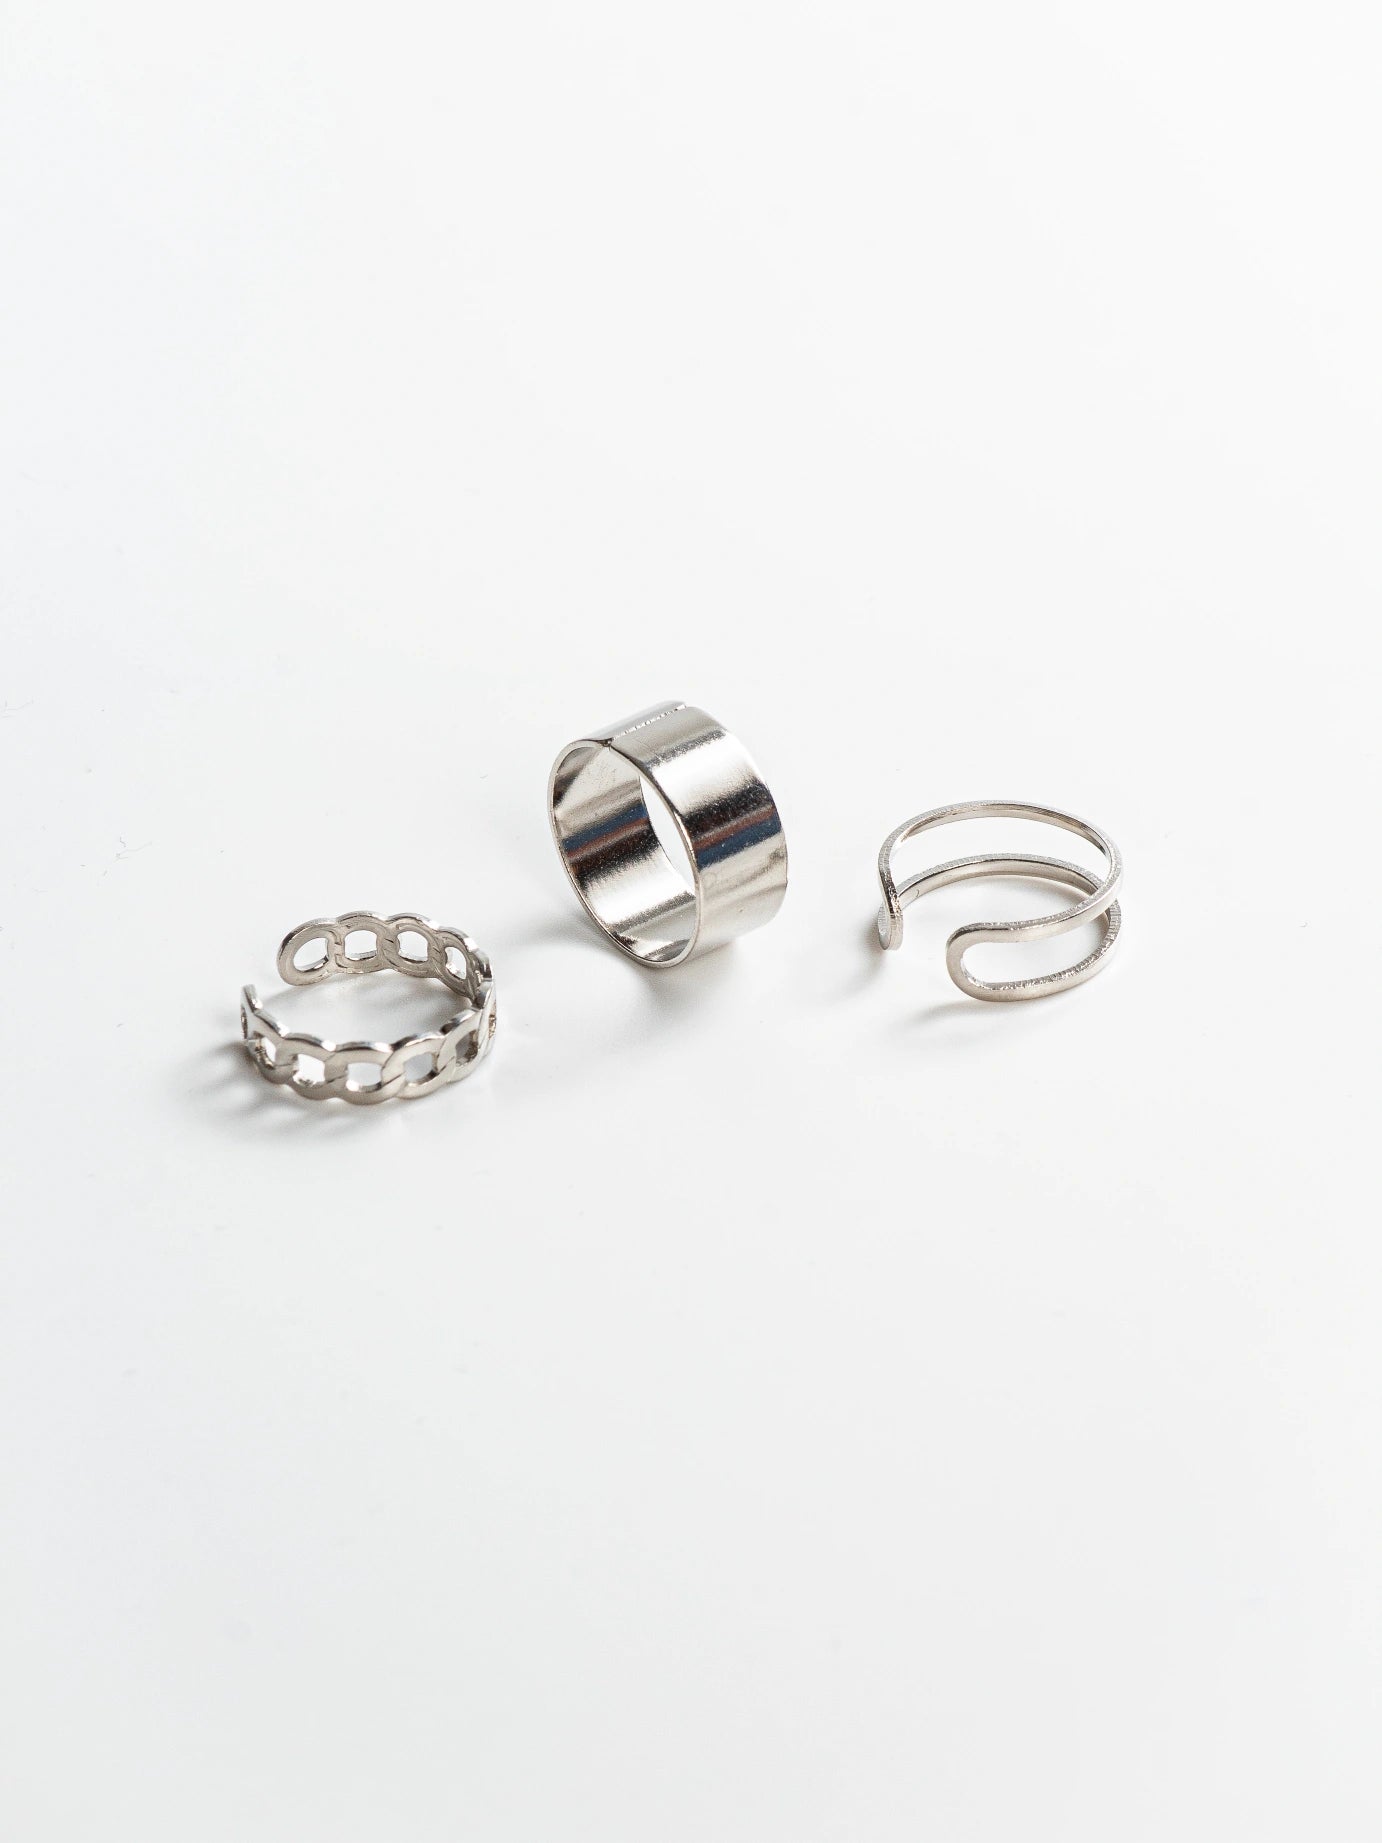 3 Pieces Y2K Silver Ring Set for Men and Women